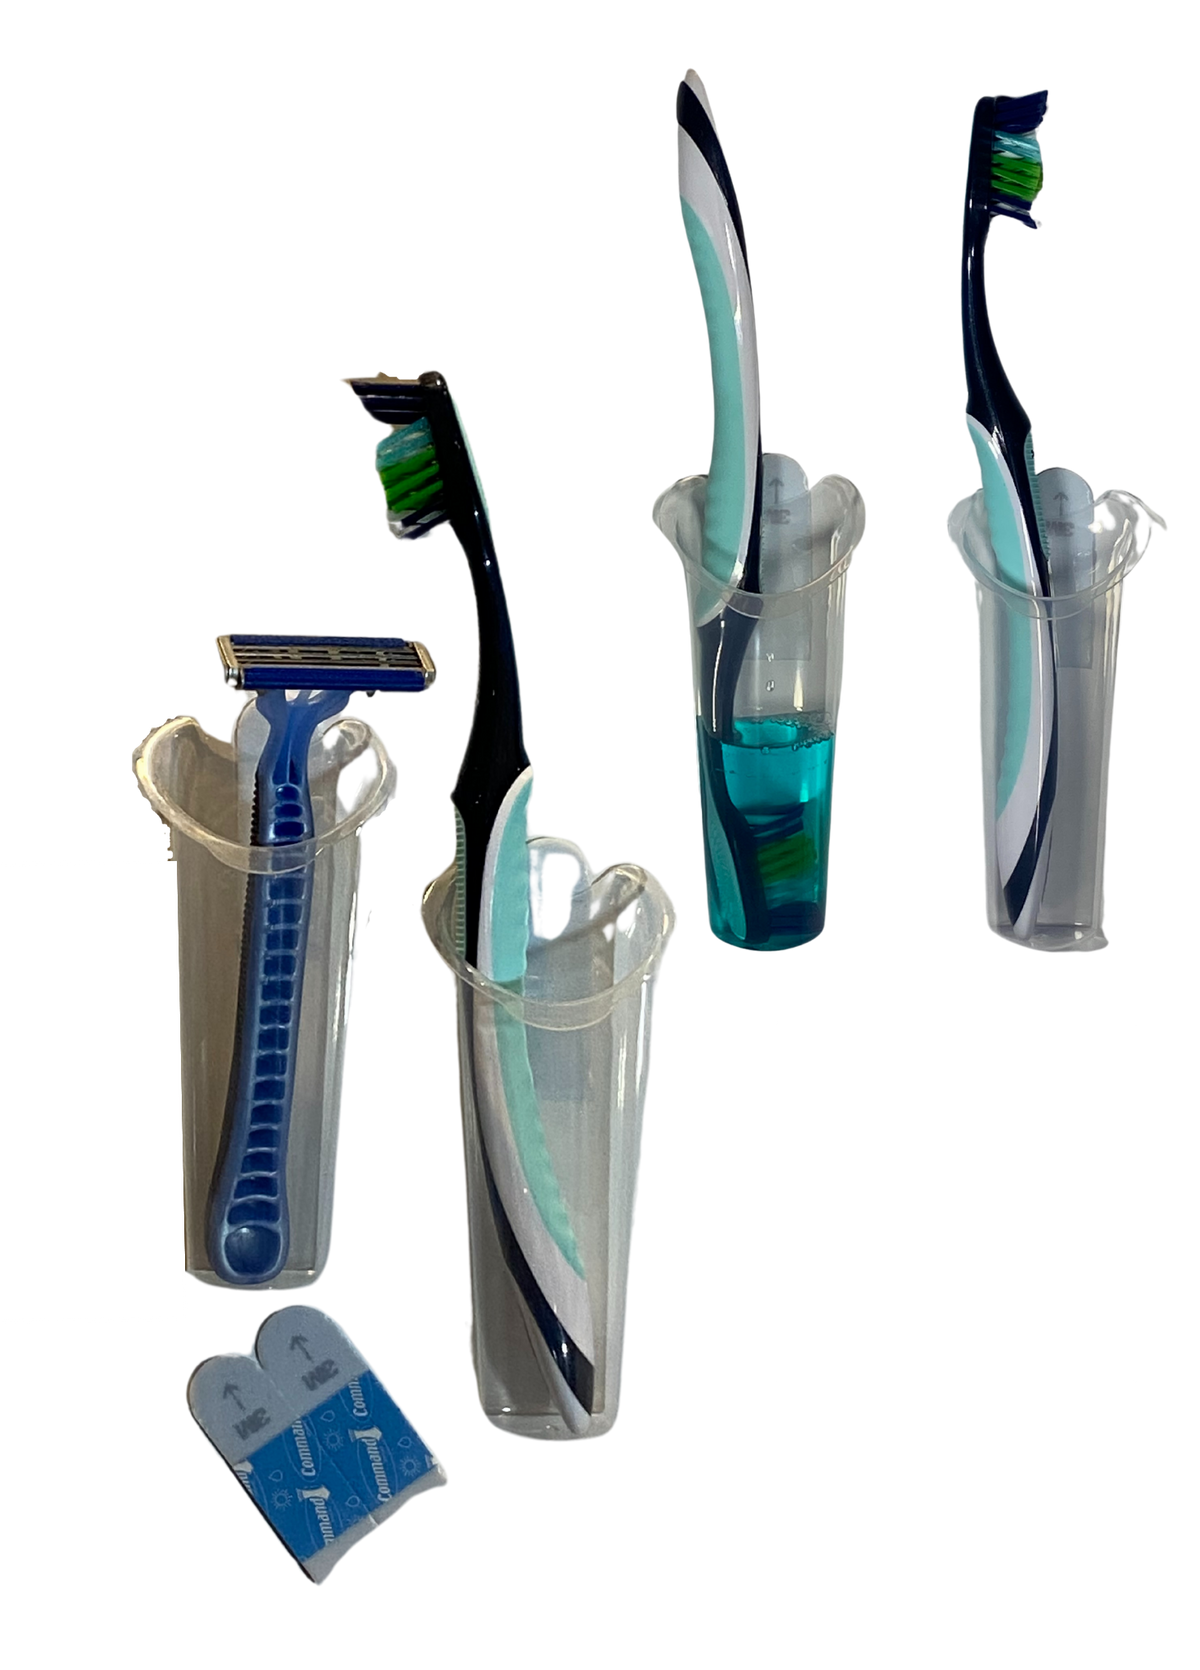 toothbrush sanitizer storage accessory and razor for bathroom and shower